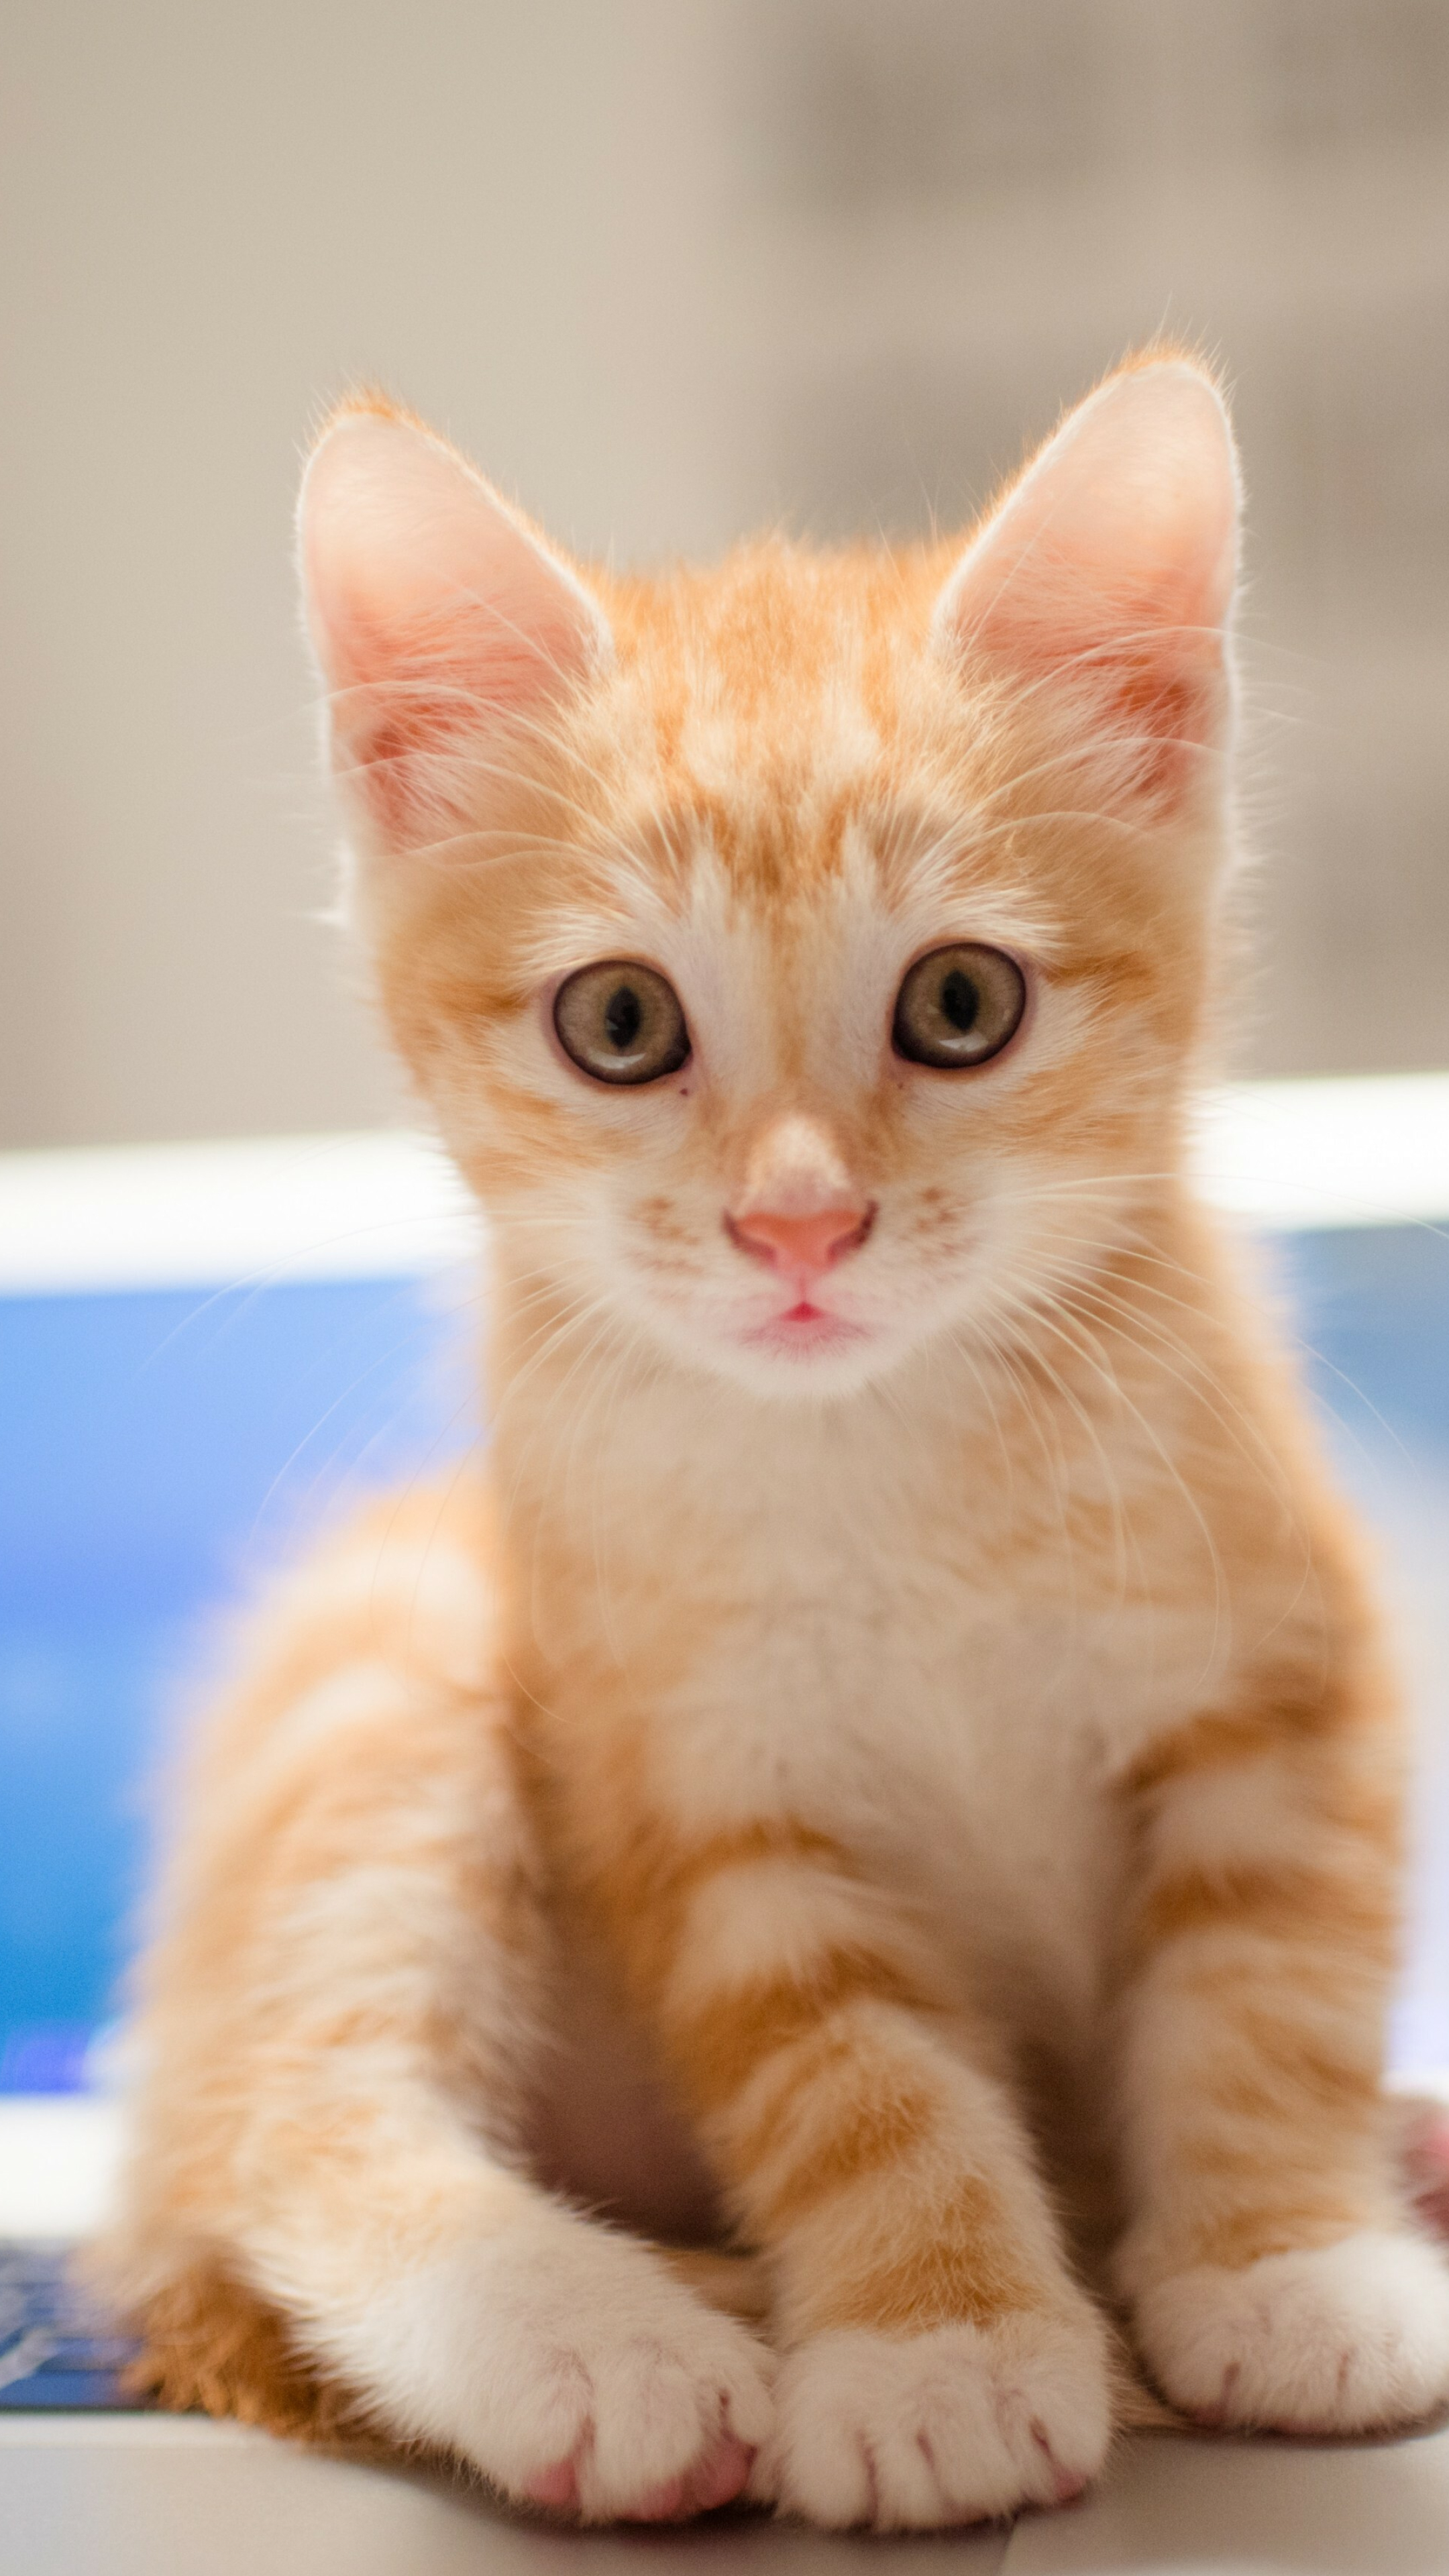 Kitten: Domesticated member of the family Felidae, Red-furred species, Cat. 2160x3840 4K Background.